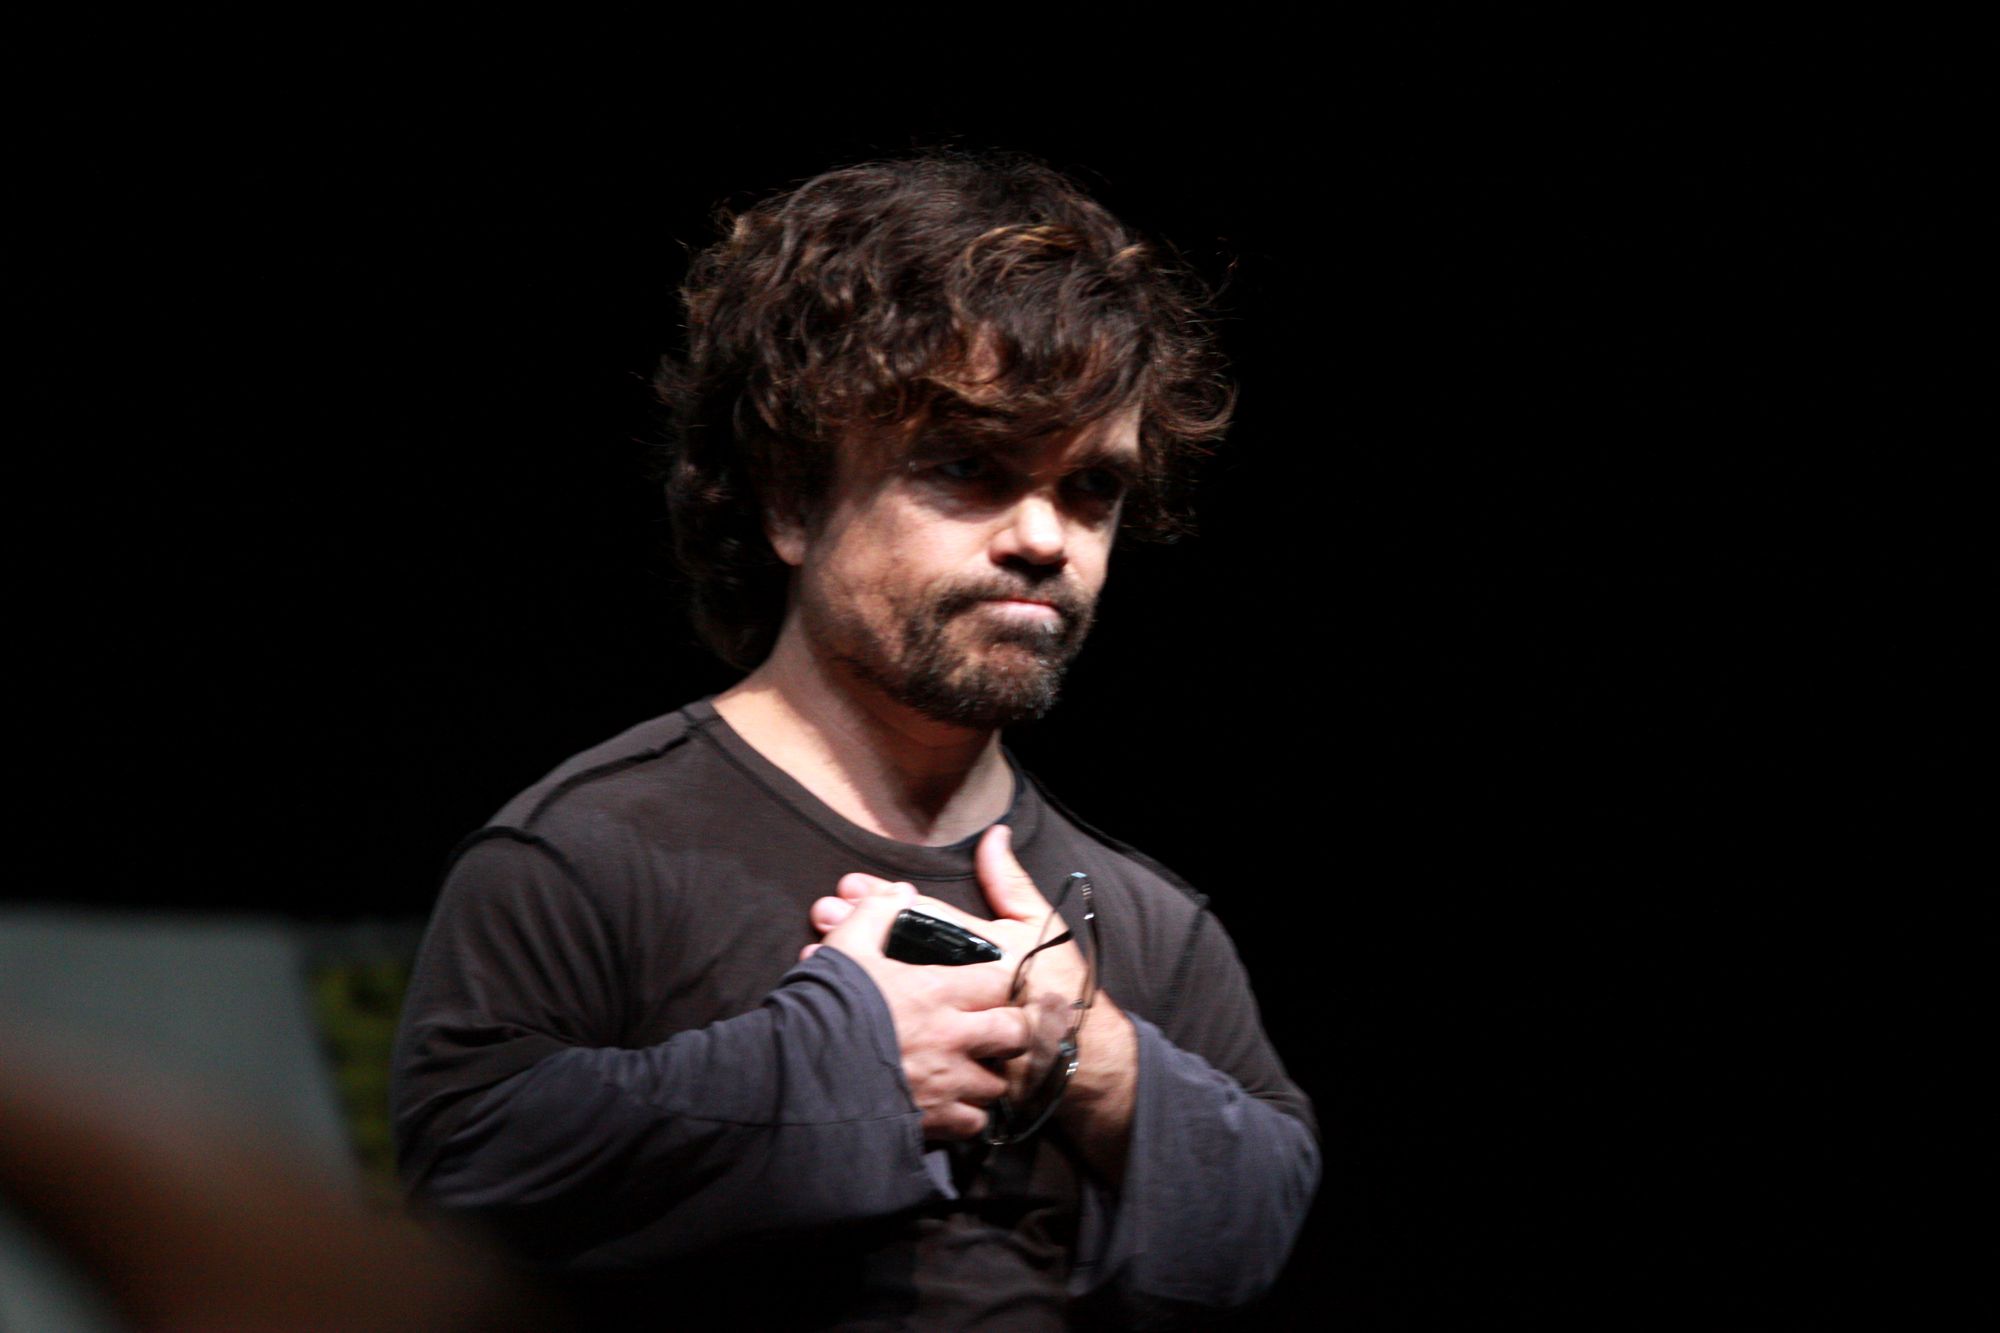 Peter Dinklage speaking at the 2013 San Diego Comic Con